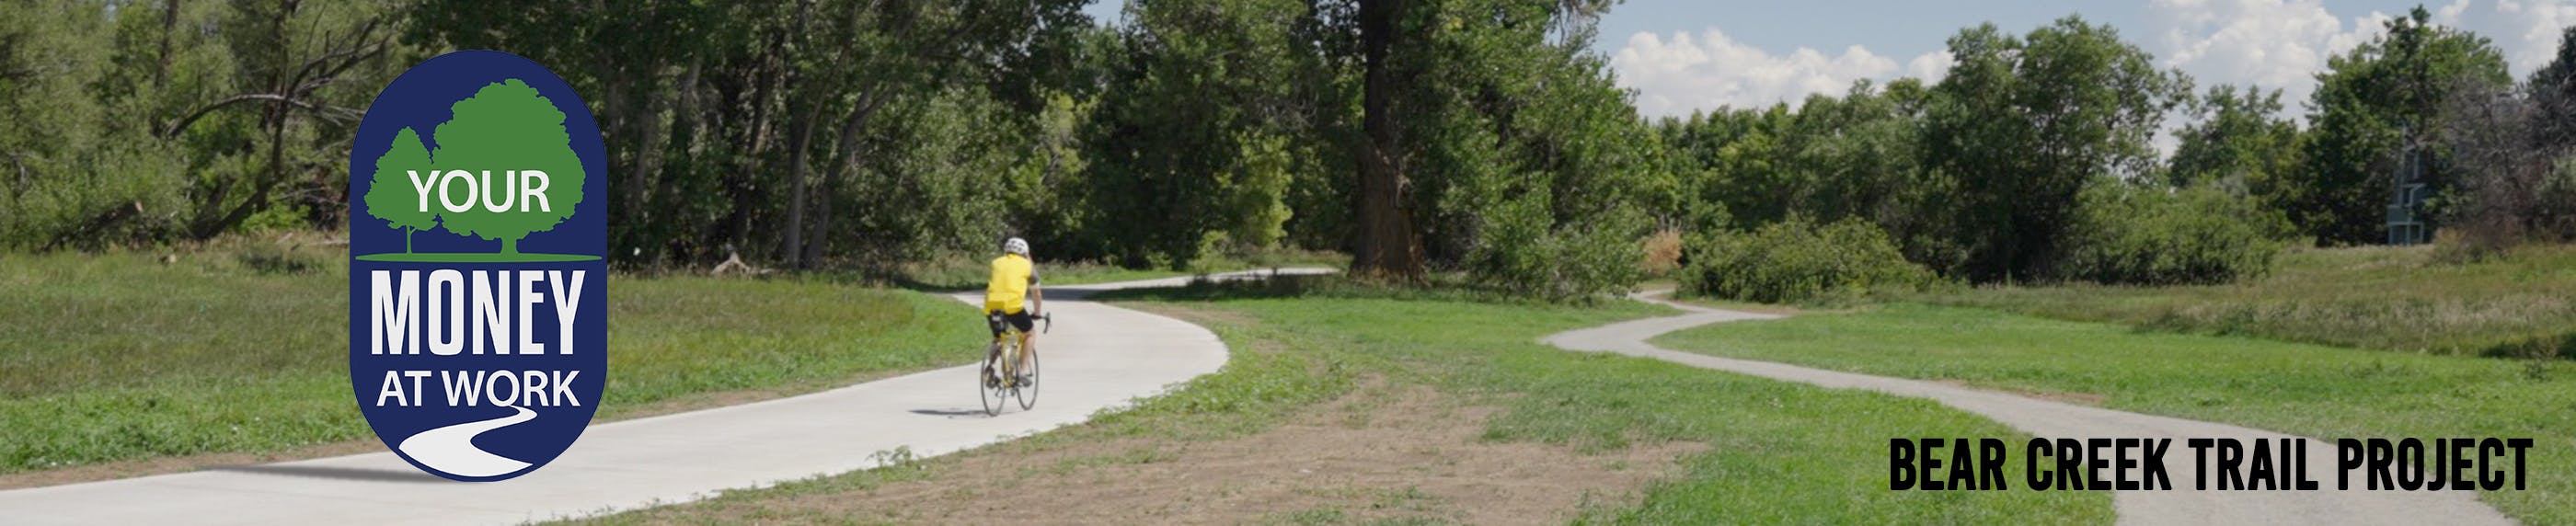 Bicyclist riding on Bear Creek Trail, and the new soft-surface trail for other users is to the right of cyclist. 